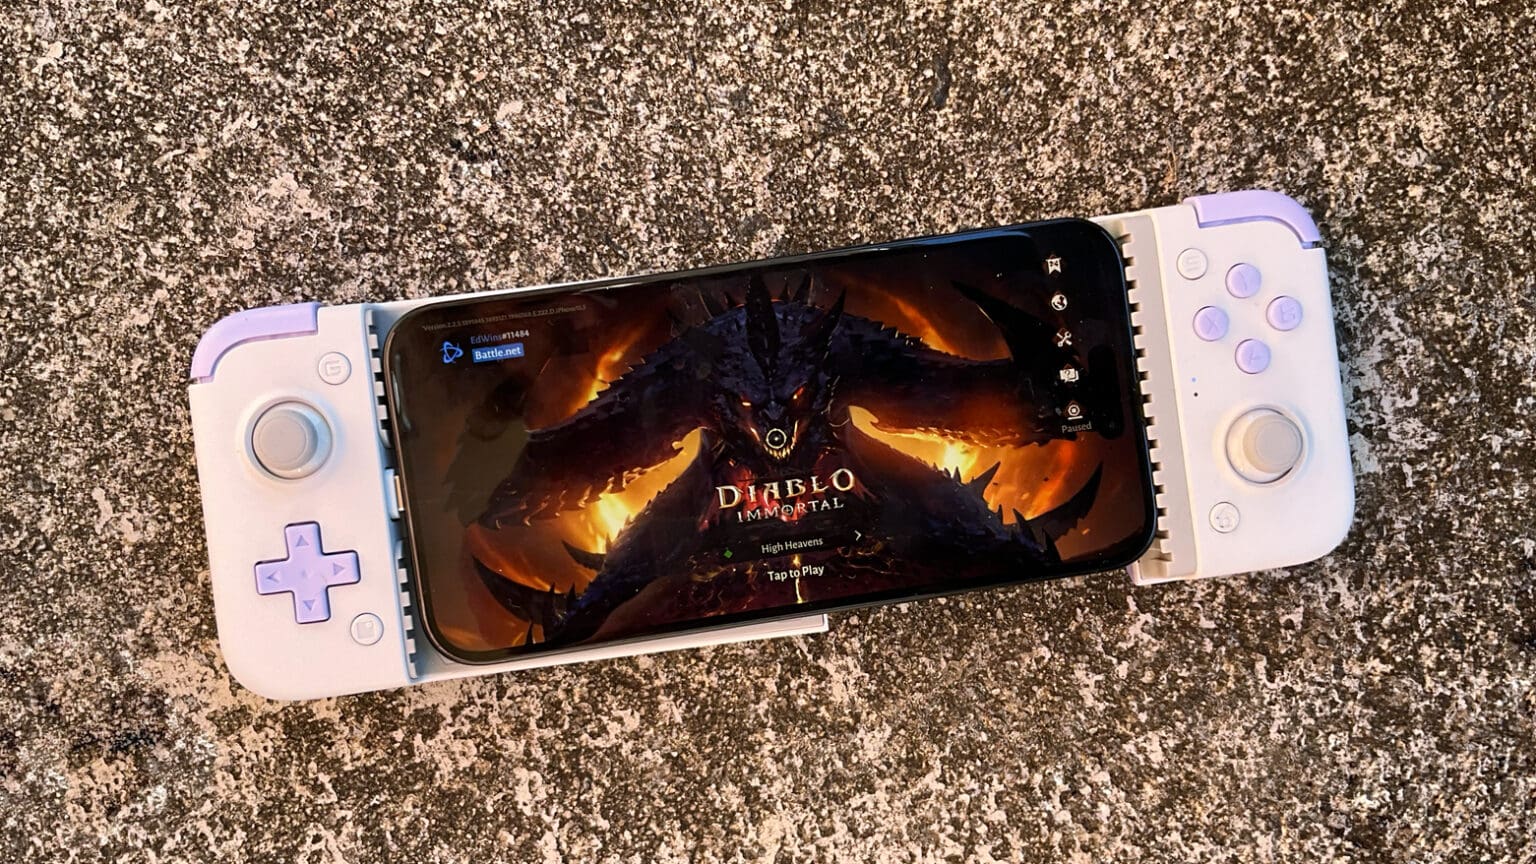 Don't play 'Diablo Immortal' without a good iPhone game controller like GameSir X2s.